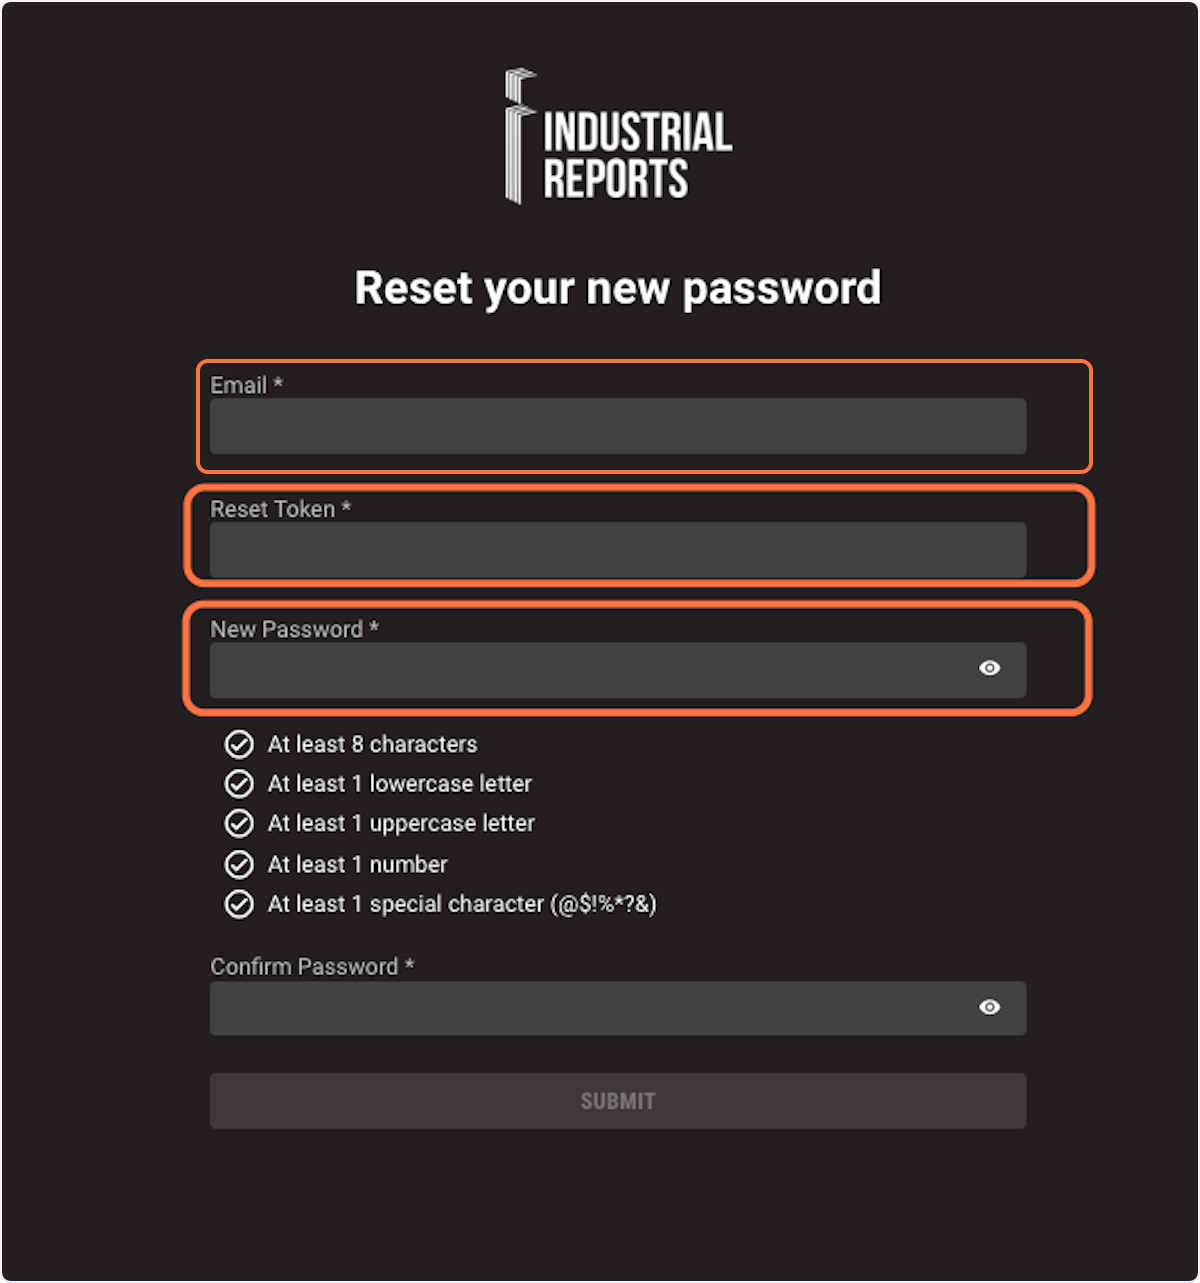 Enter your email address, reset token and create a new password.